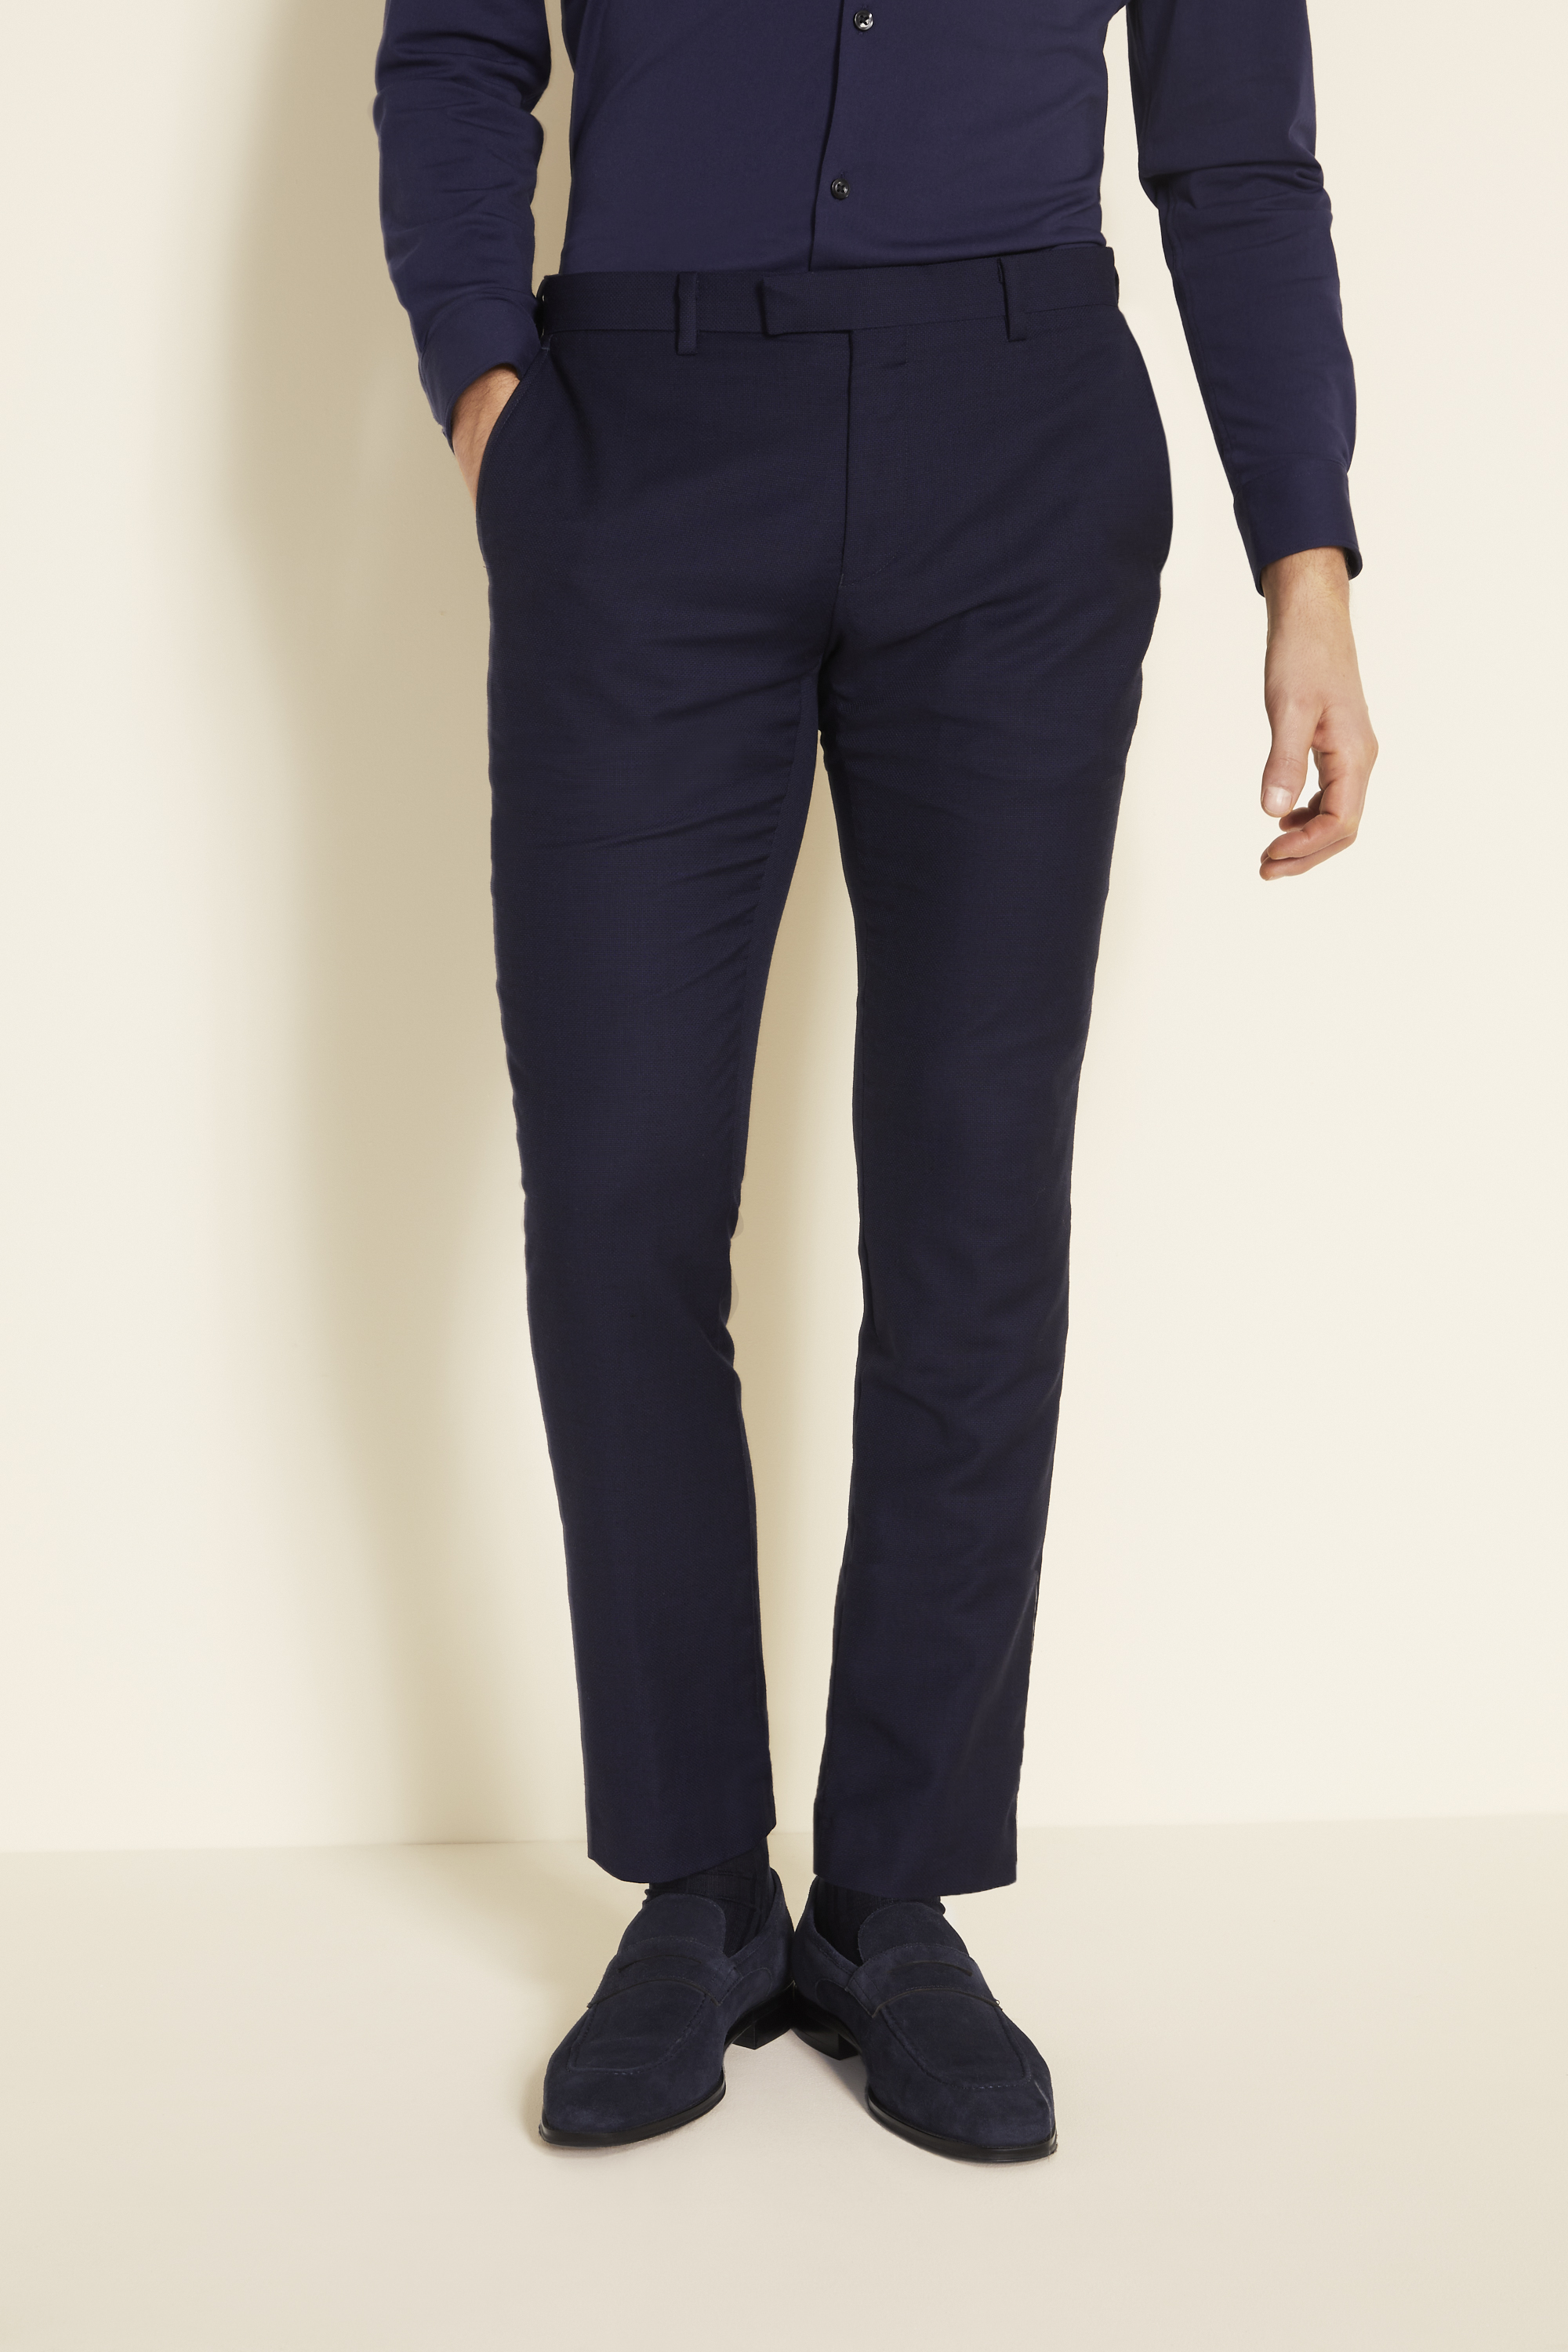 Slim Fit Navy Panama Trousers | Buy Online at Moss